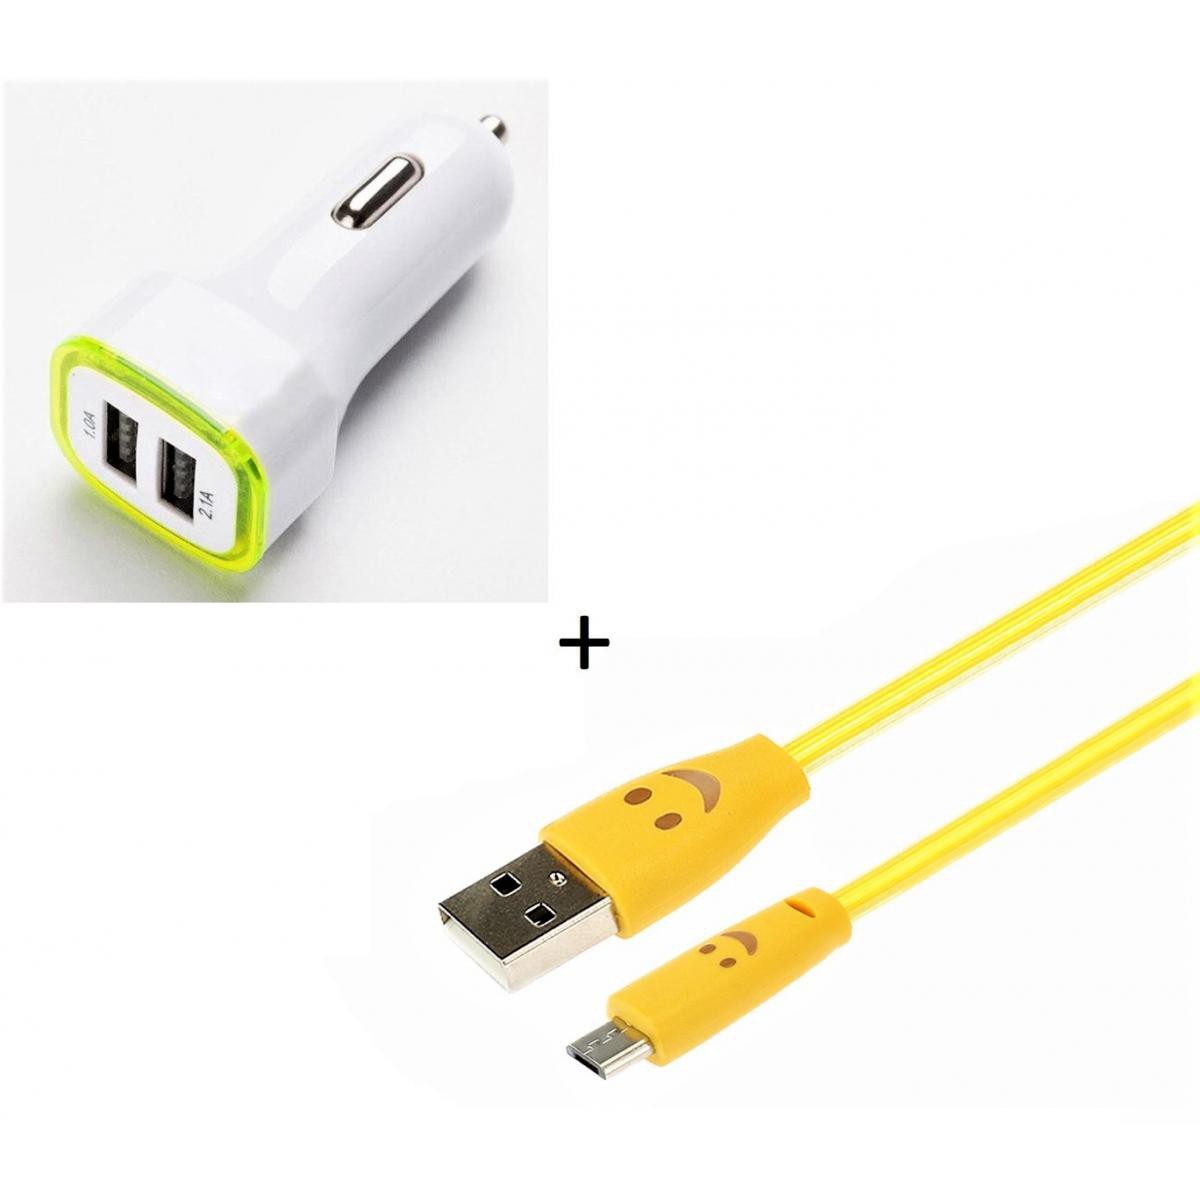 Shot - Pack Chargeur Voiture pour WIKO Y60 Smartphone Micro USB (Cable Smiley + Double Adaptateur LED Allume Cigare) (JAUNE) - Chargeur Voiture 12V